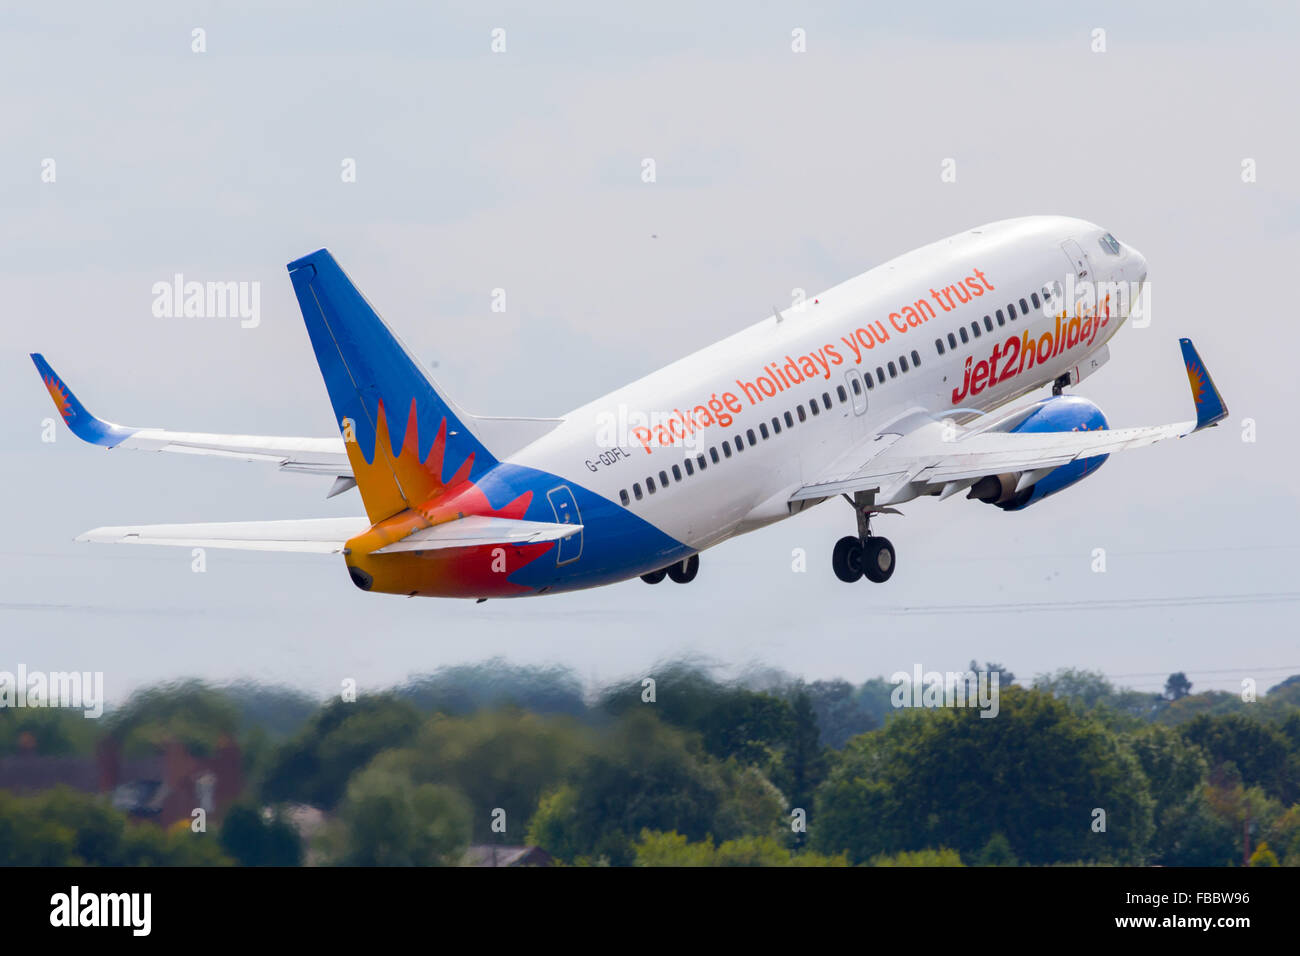 Jet 2 Holidays Airline Stock Photo